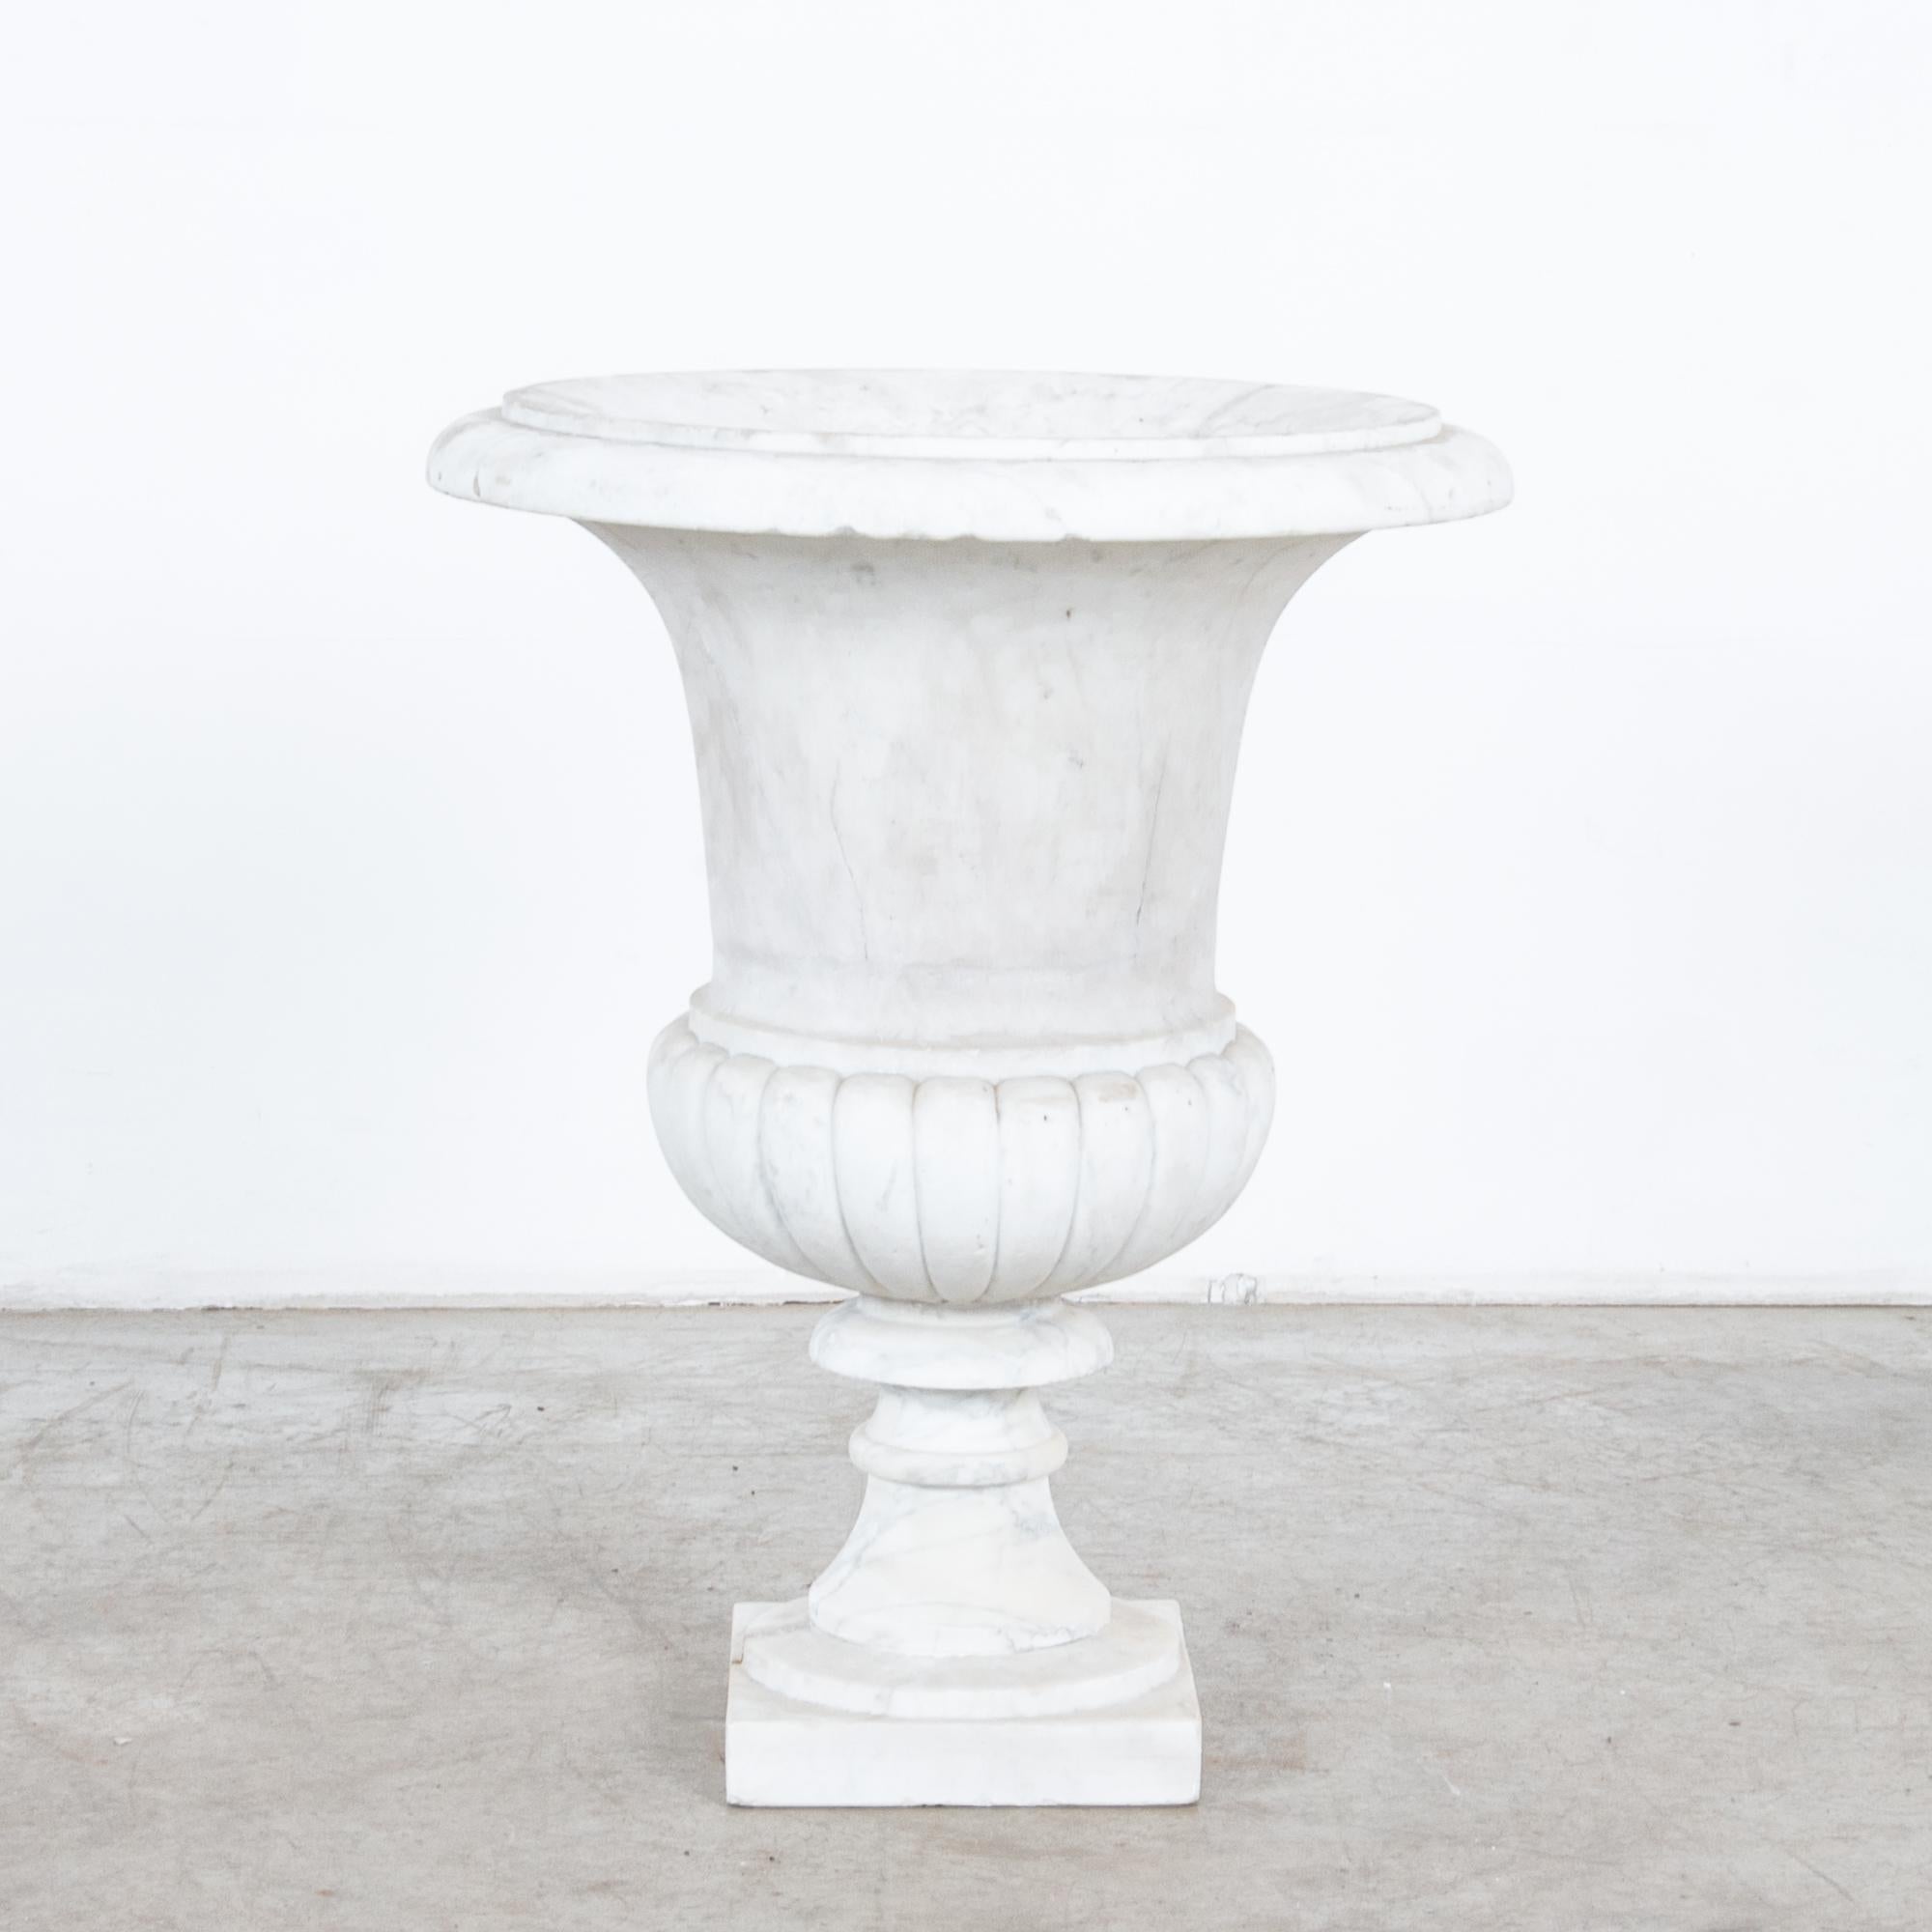 A campana style urn from 1960s Italy. A neoclassical silhouette which evokes the landscape gardens of sun-soaked Italian villas, rendered in white marble, veined with grey. A flared lip blossoms into an upturned bell-shape; a small pedestal elevates